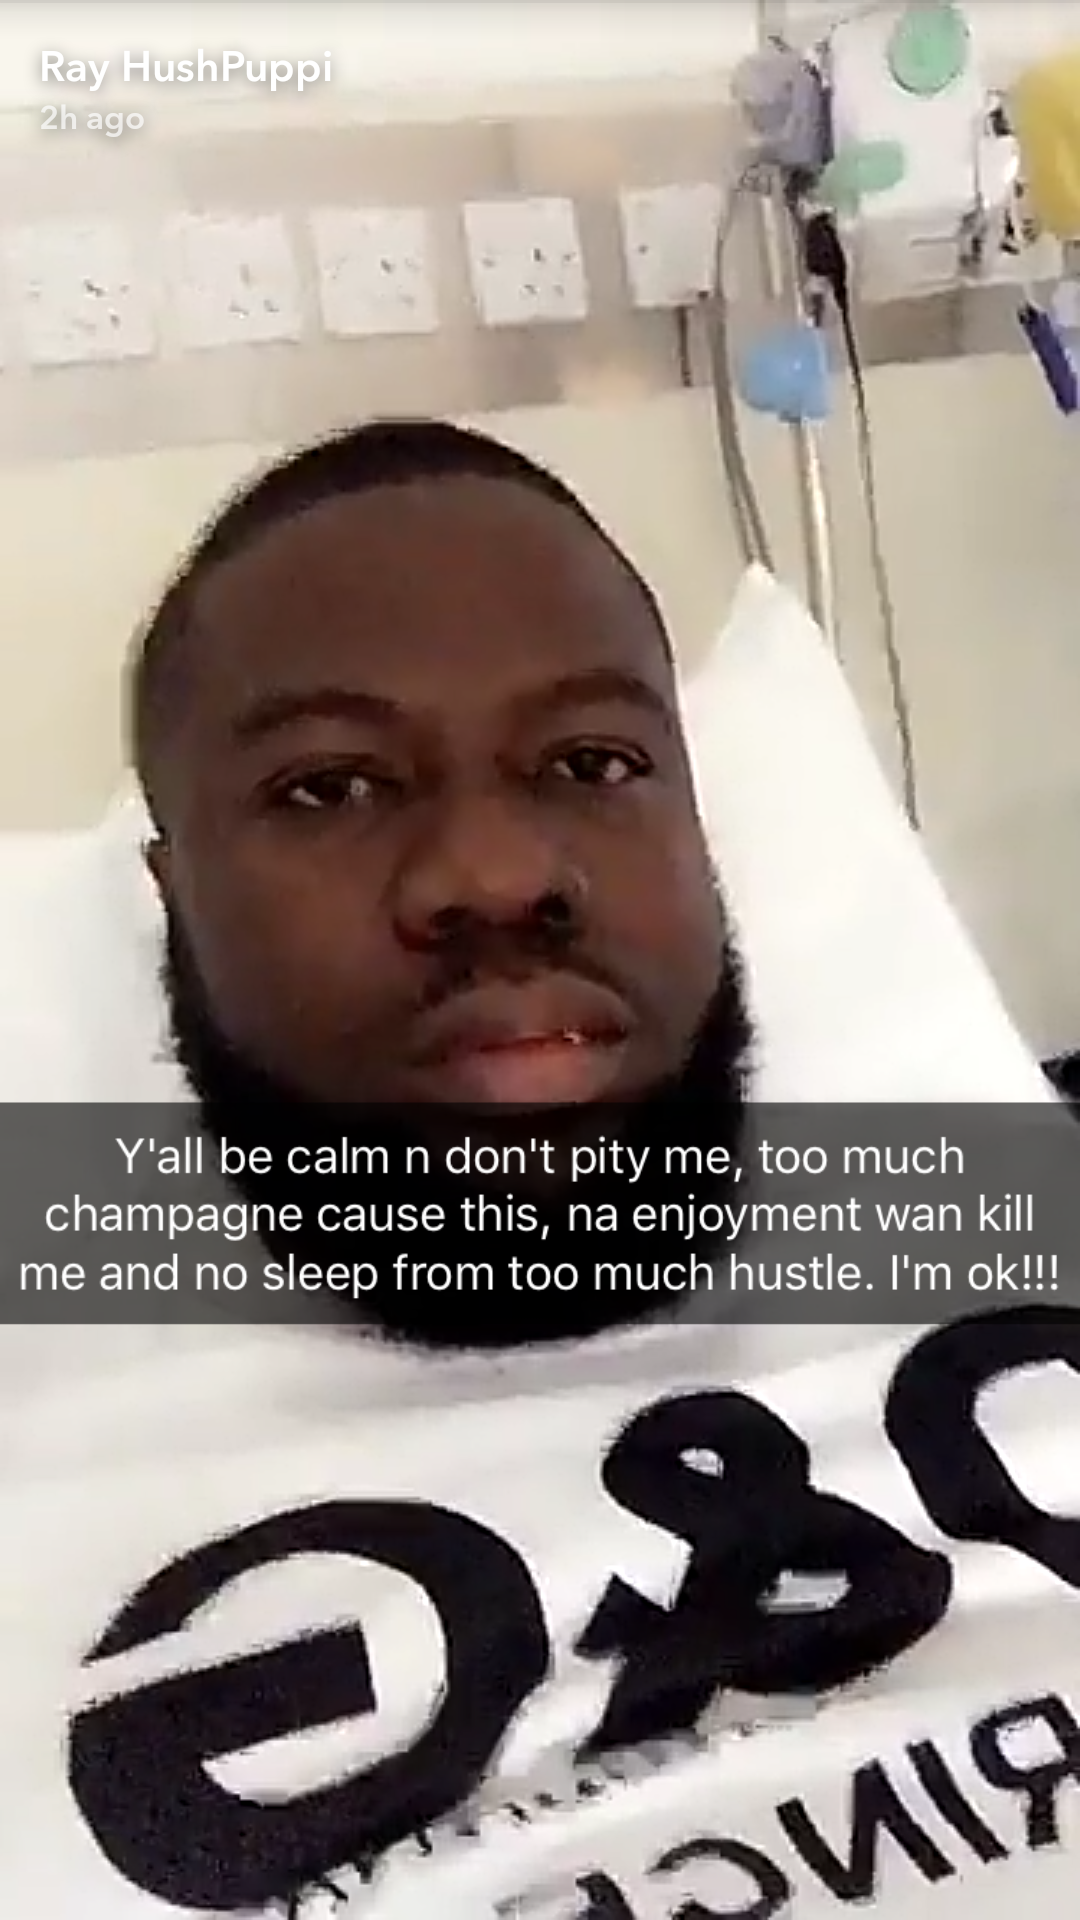 Hushpuppi Has Been Hospitalized After Too Much Champagne (1)